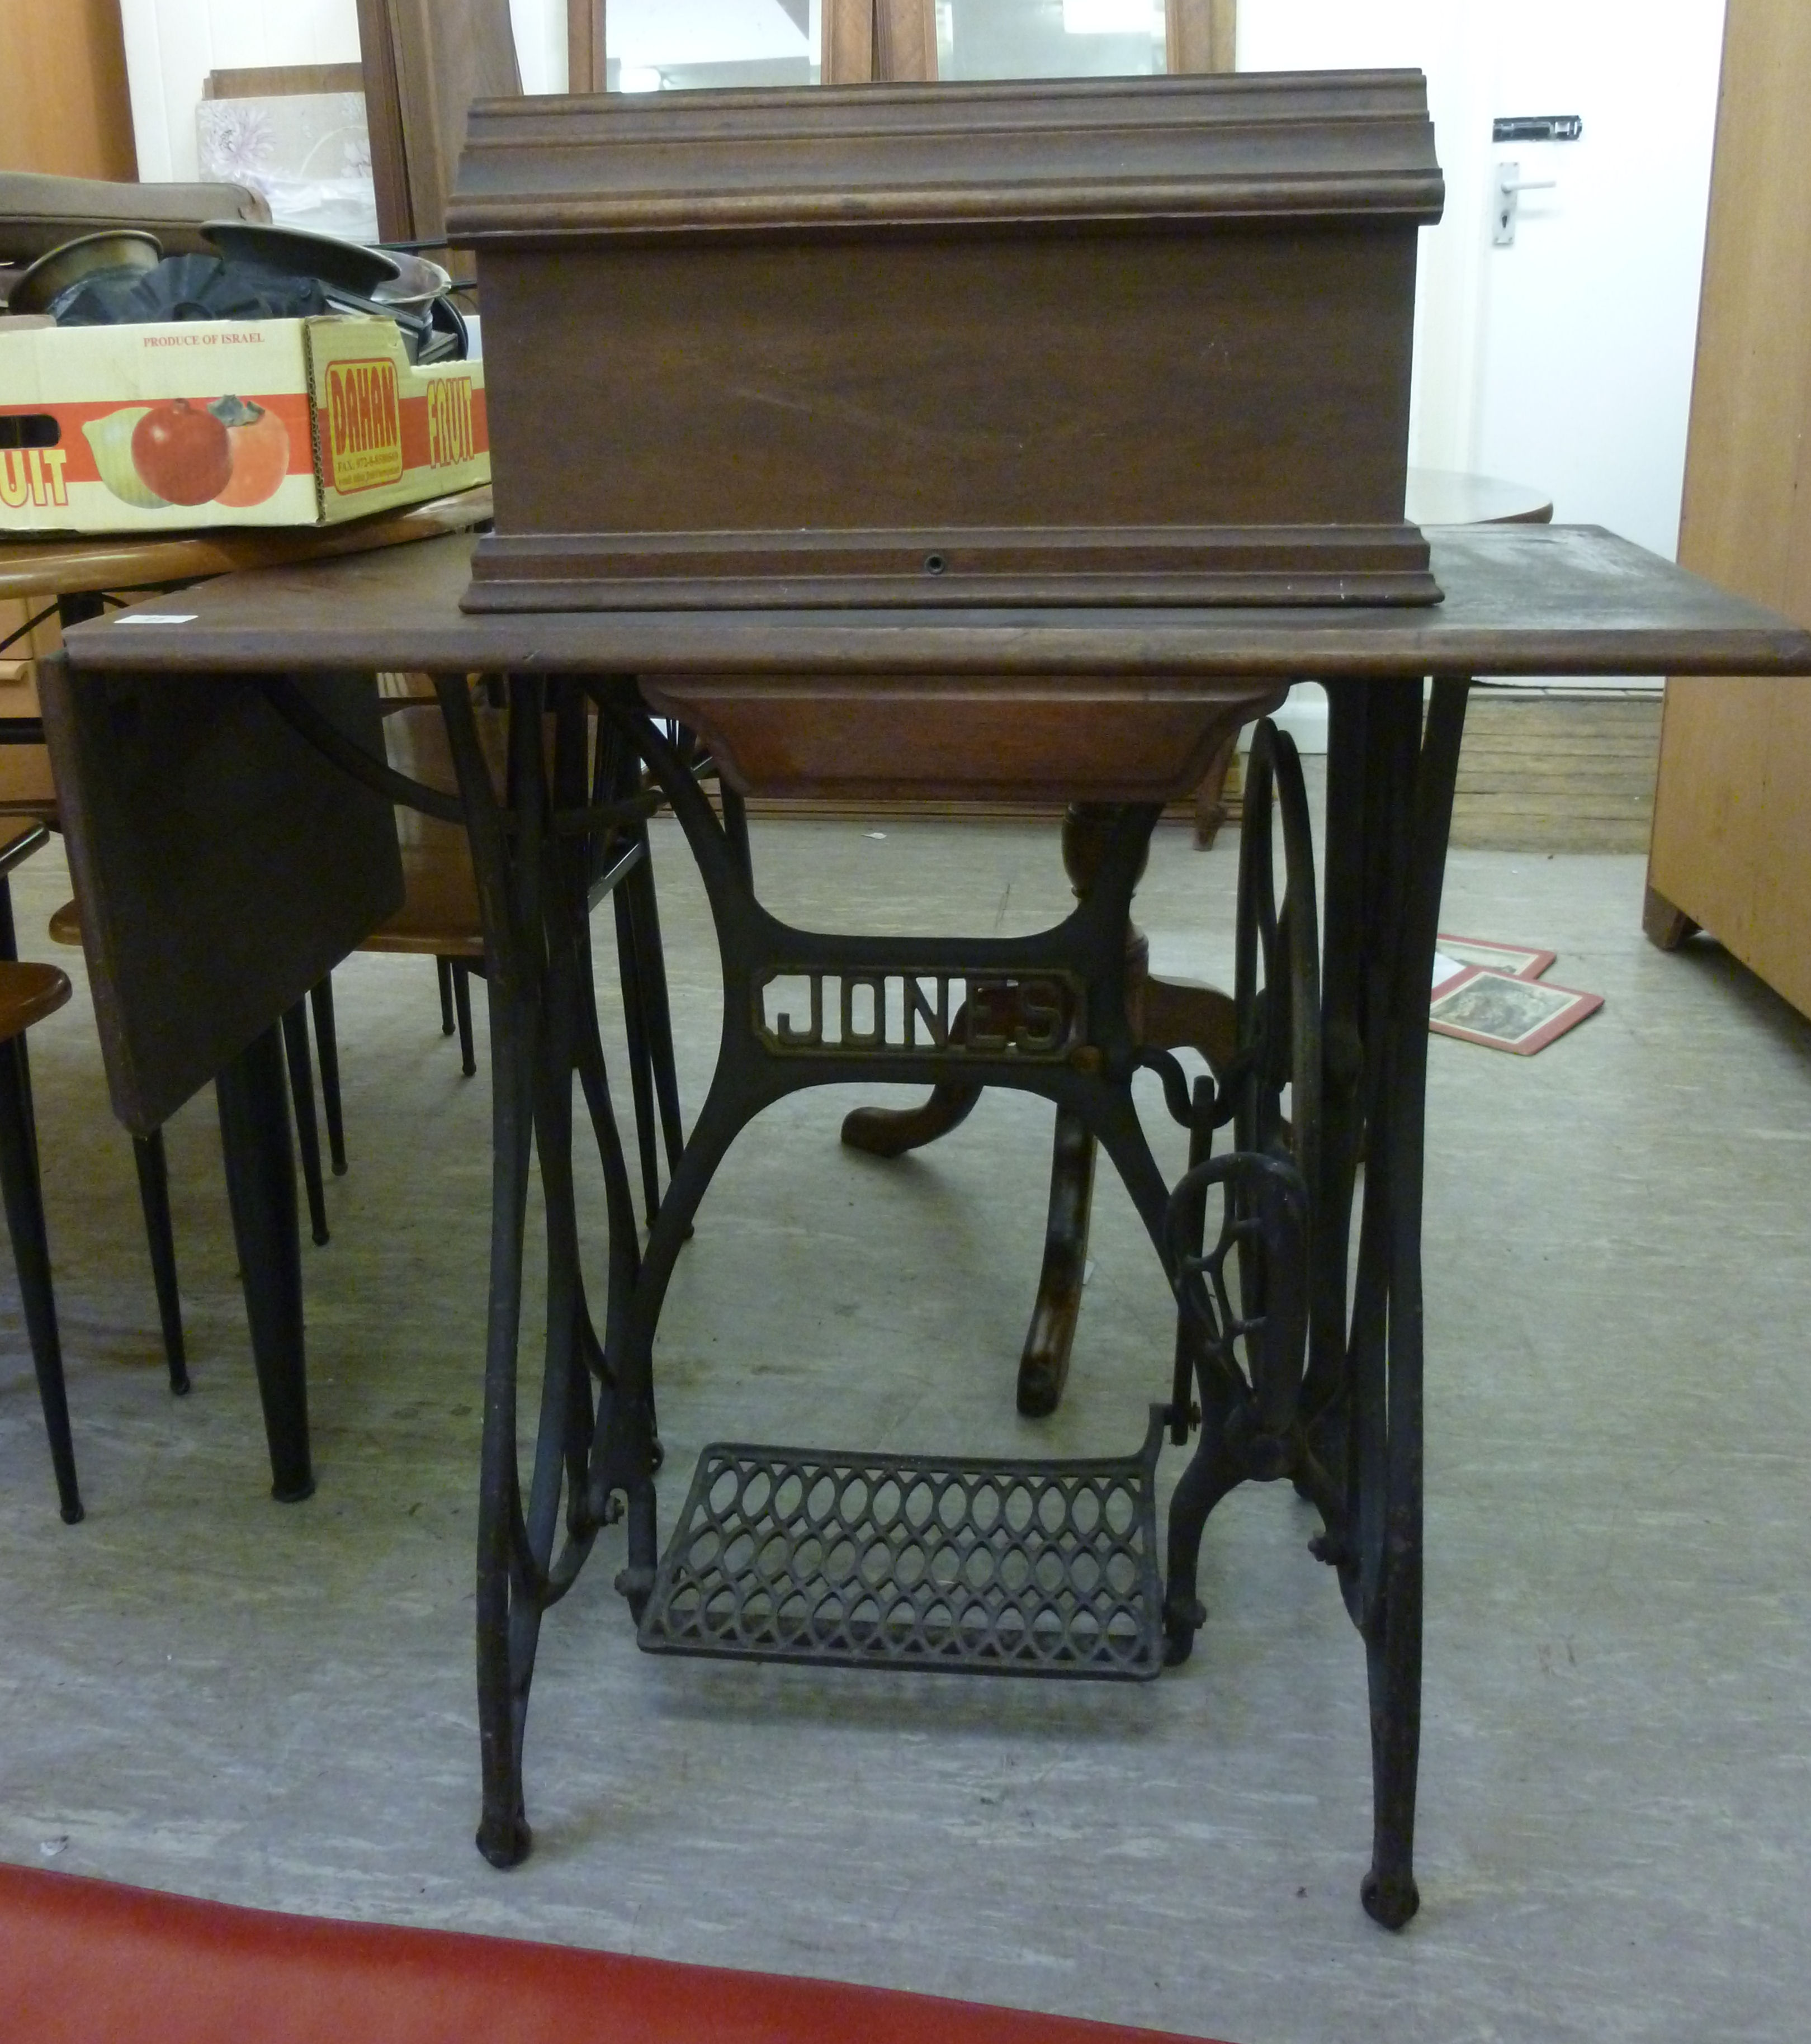 An early 20thC Jones treadle sewing mach - Image 2 of 2